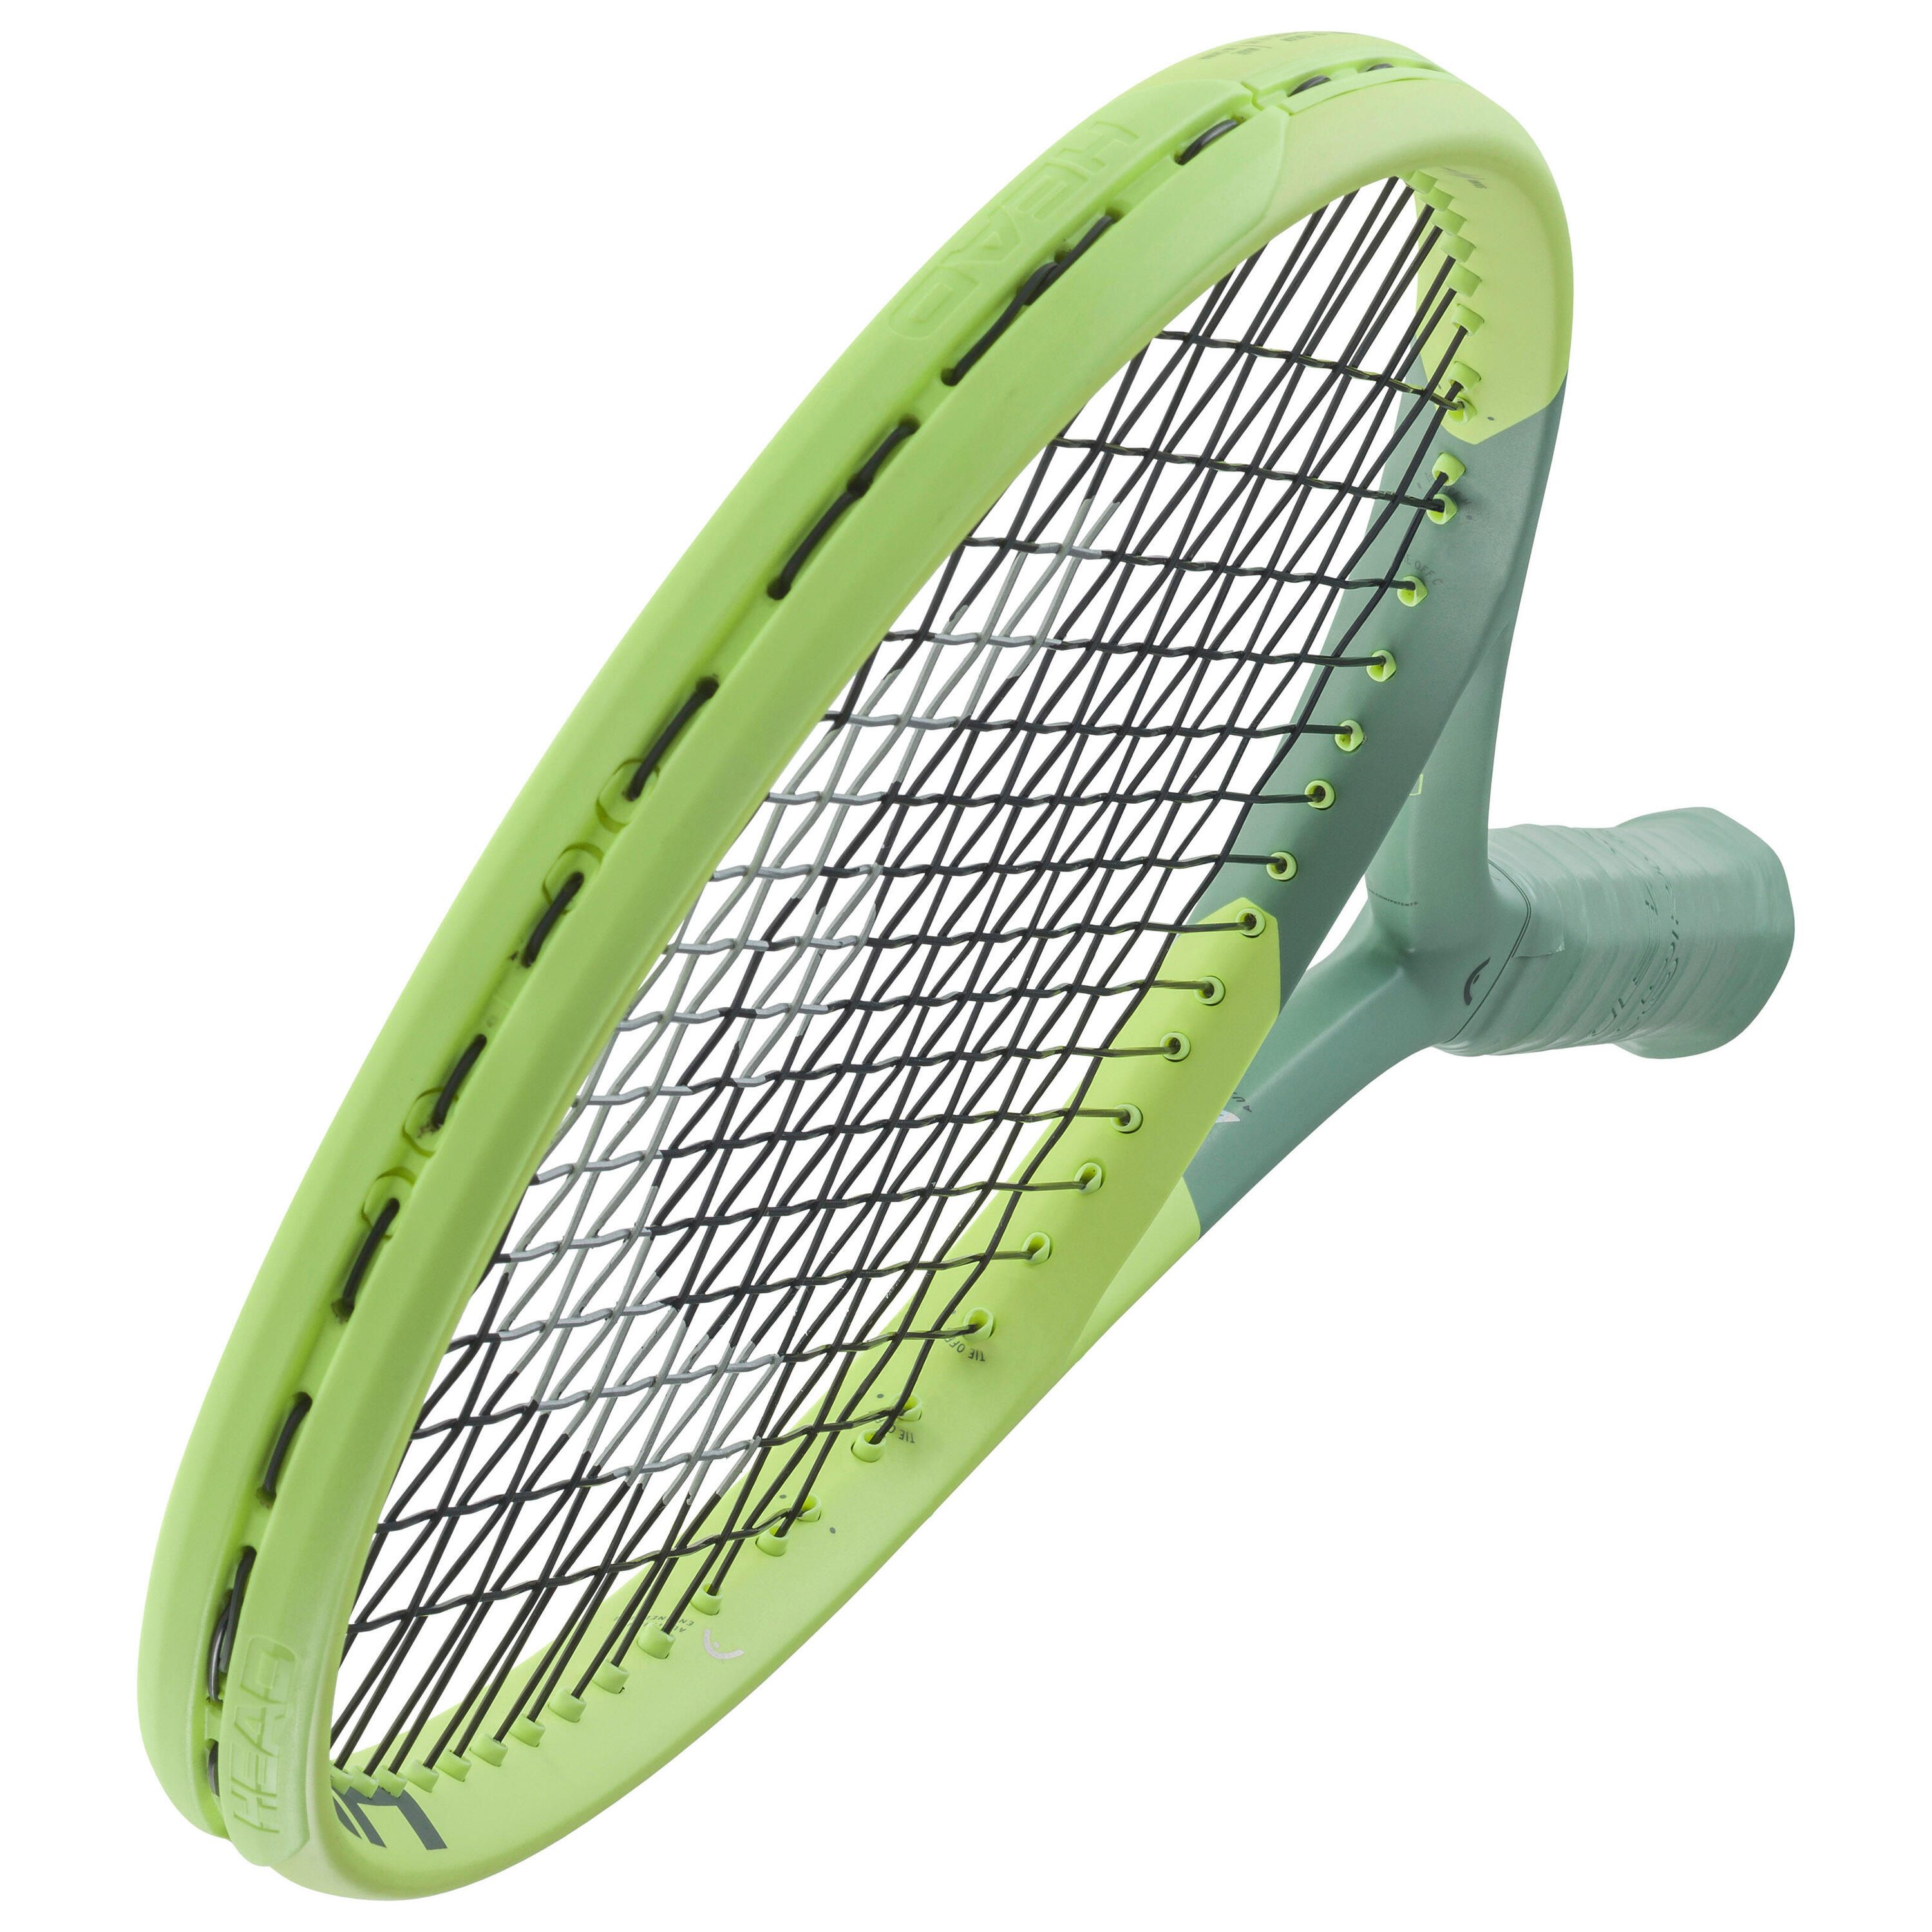 Adult Tennis Racket Auxetic Extreme MP 300 g- Grey/Yellow 8/9